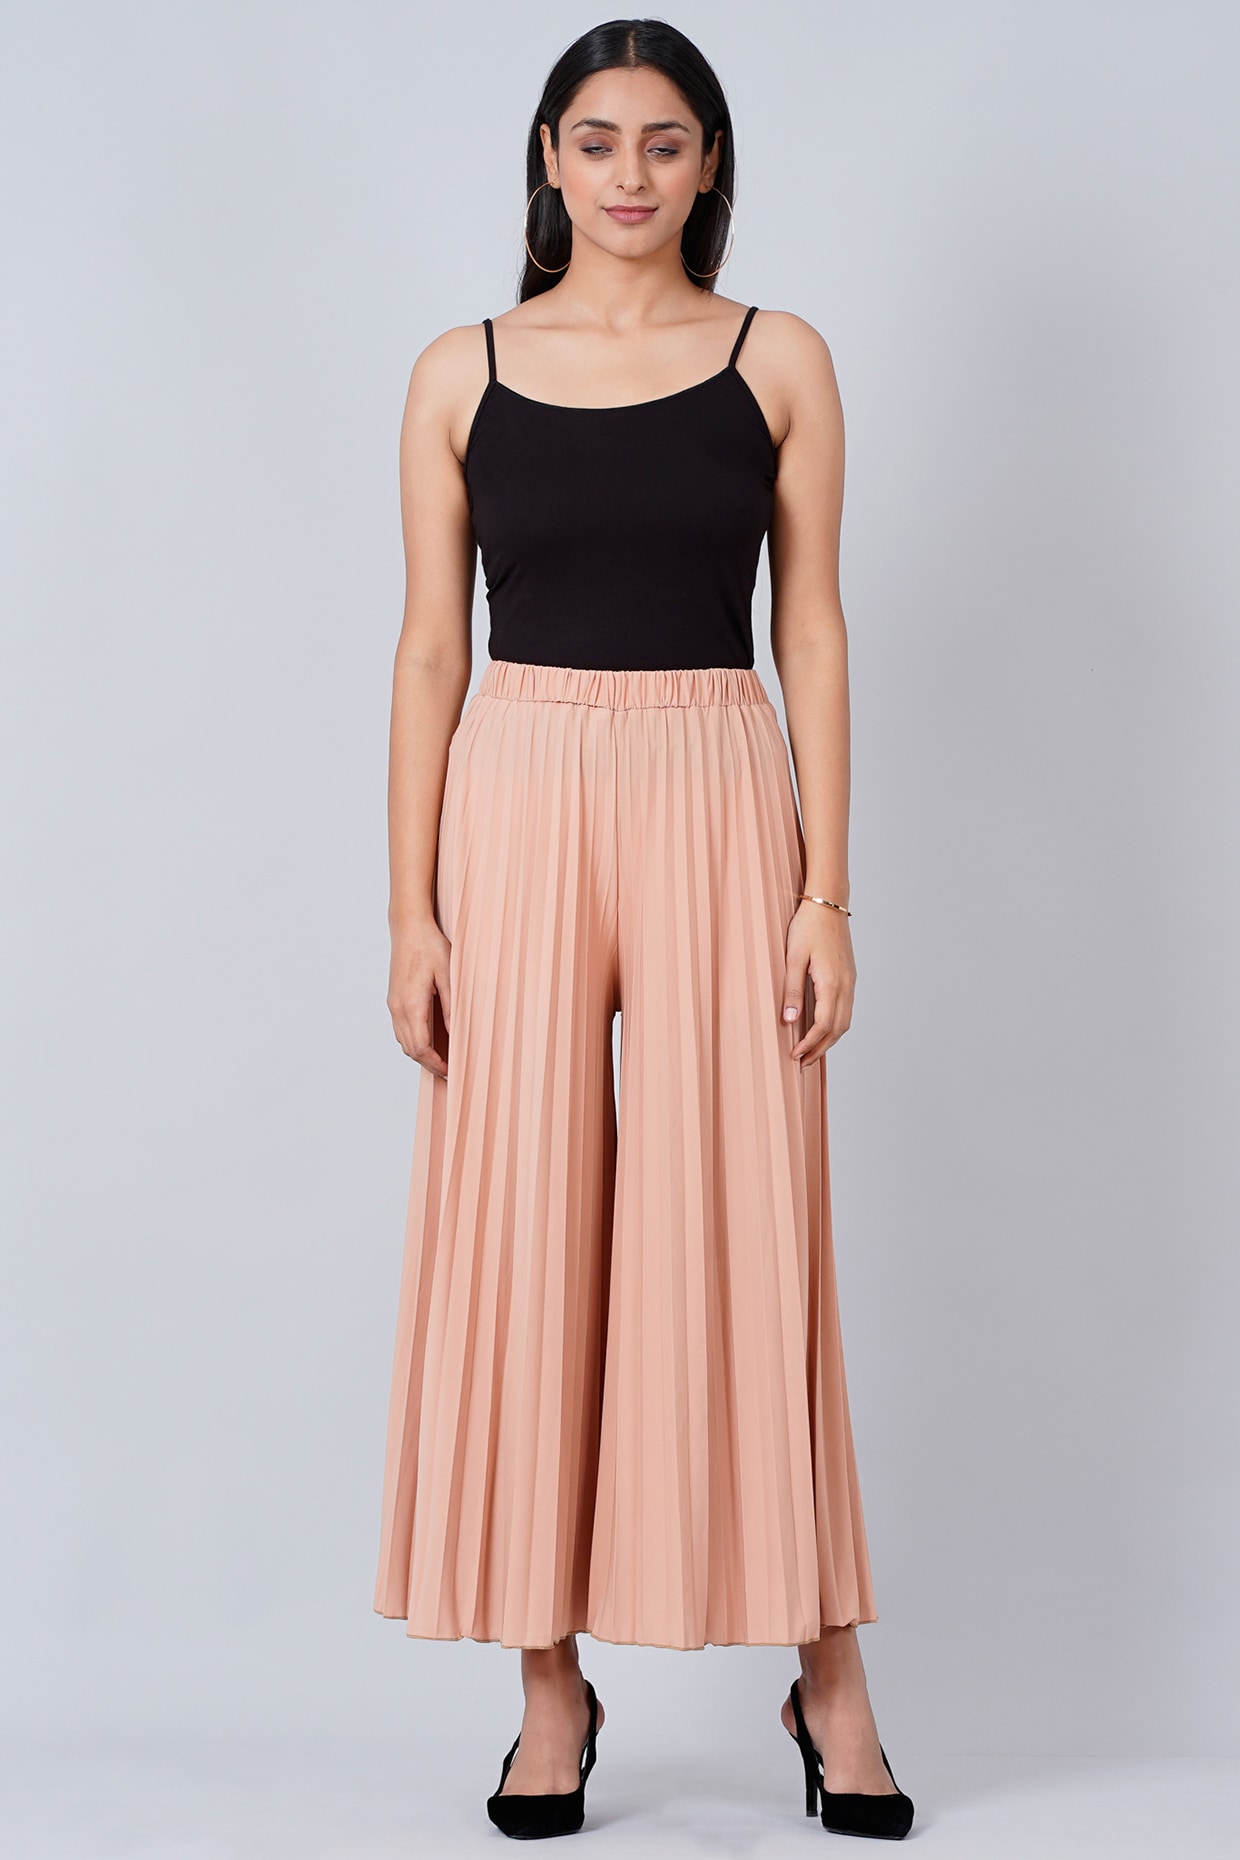 Femme Sequel Palazzo  Buy Femme Sequel Palm Palazzo Pants Salmon Online   Nykaa Fashion